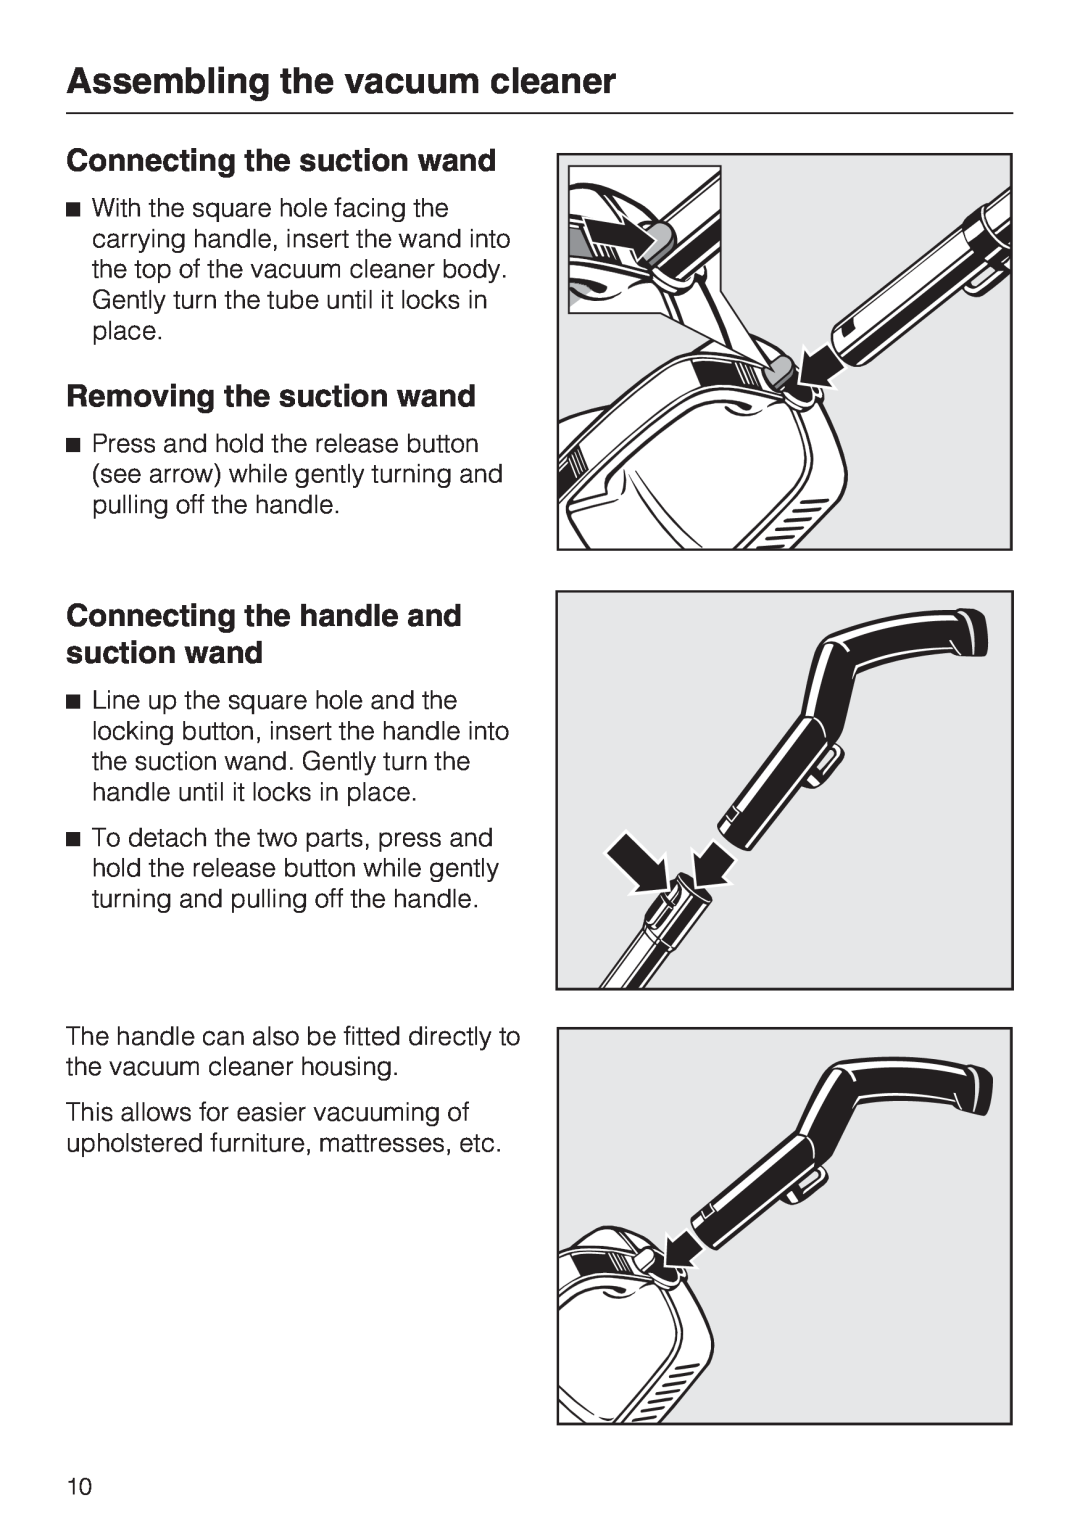 Miele S 190 operating instructions Assembling the vacuum cleaner, Connecting the suction wand, Removing the suction wand 